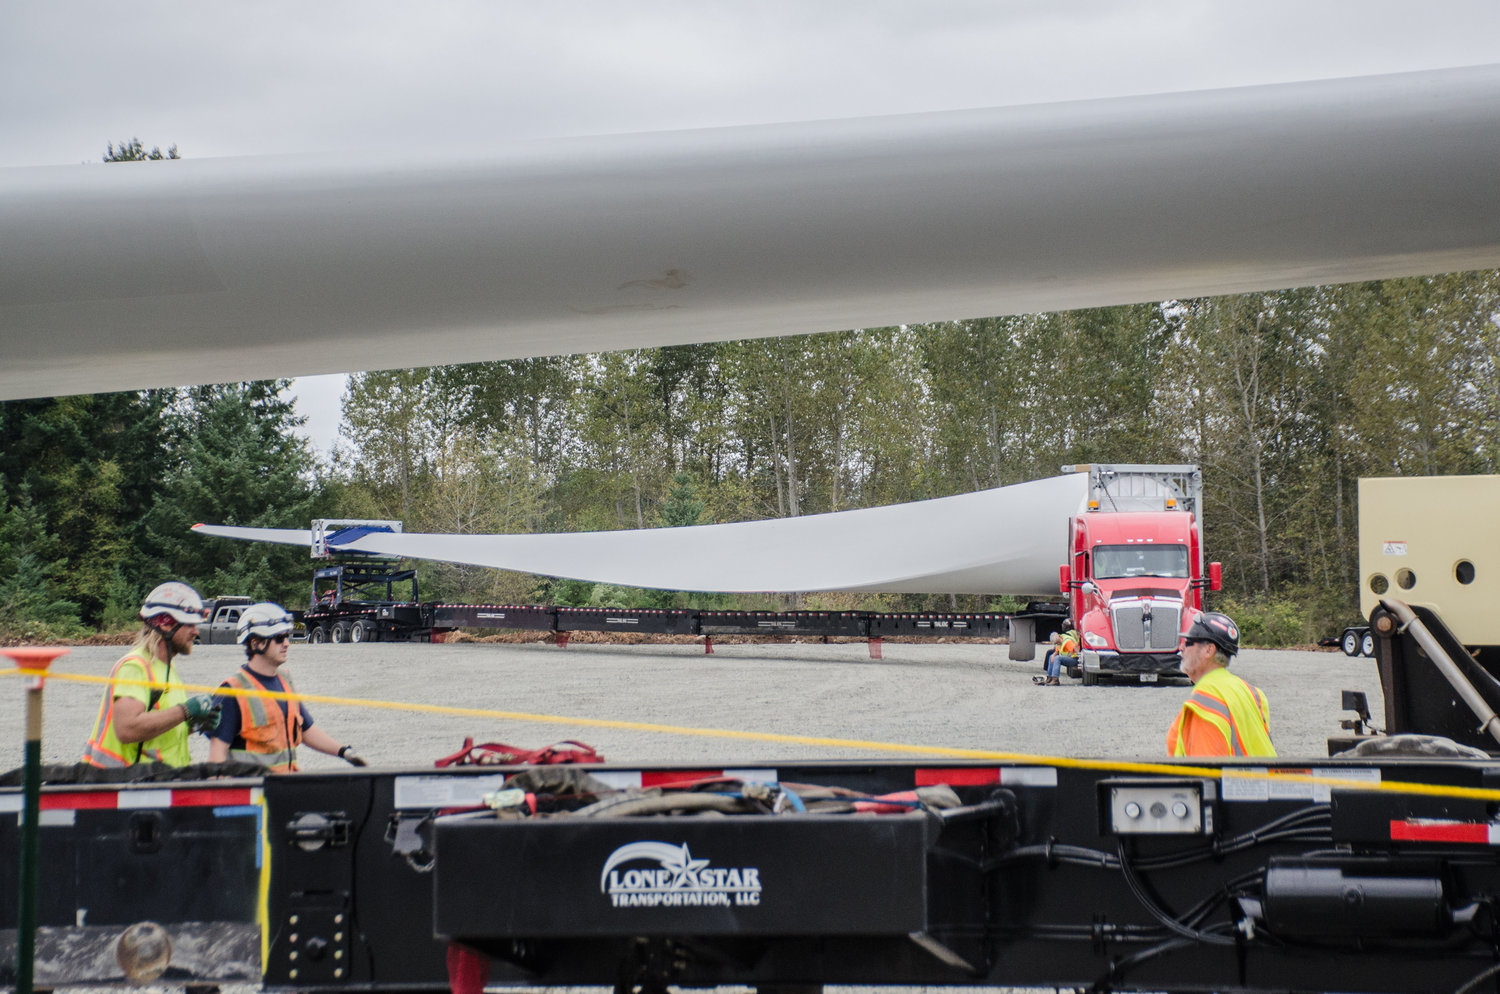 Wind turbine blades, roughly 220-feet in length, are pictured at the Skookumchuck Wind Project in this file photo.